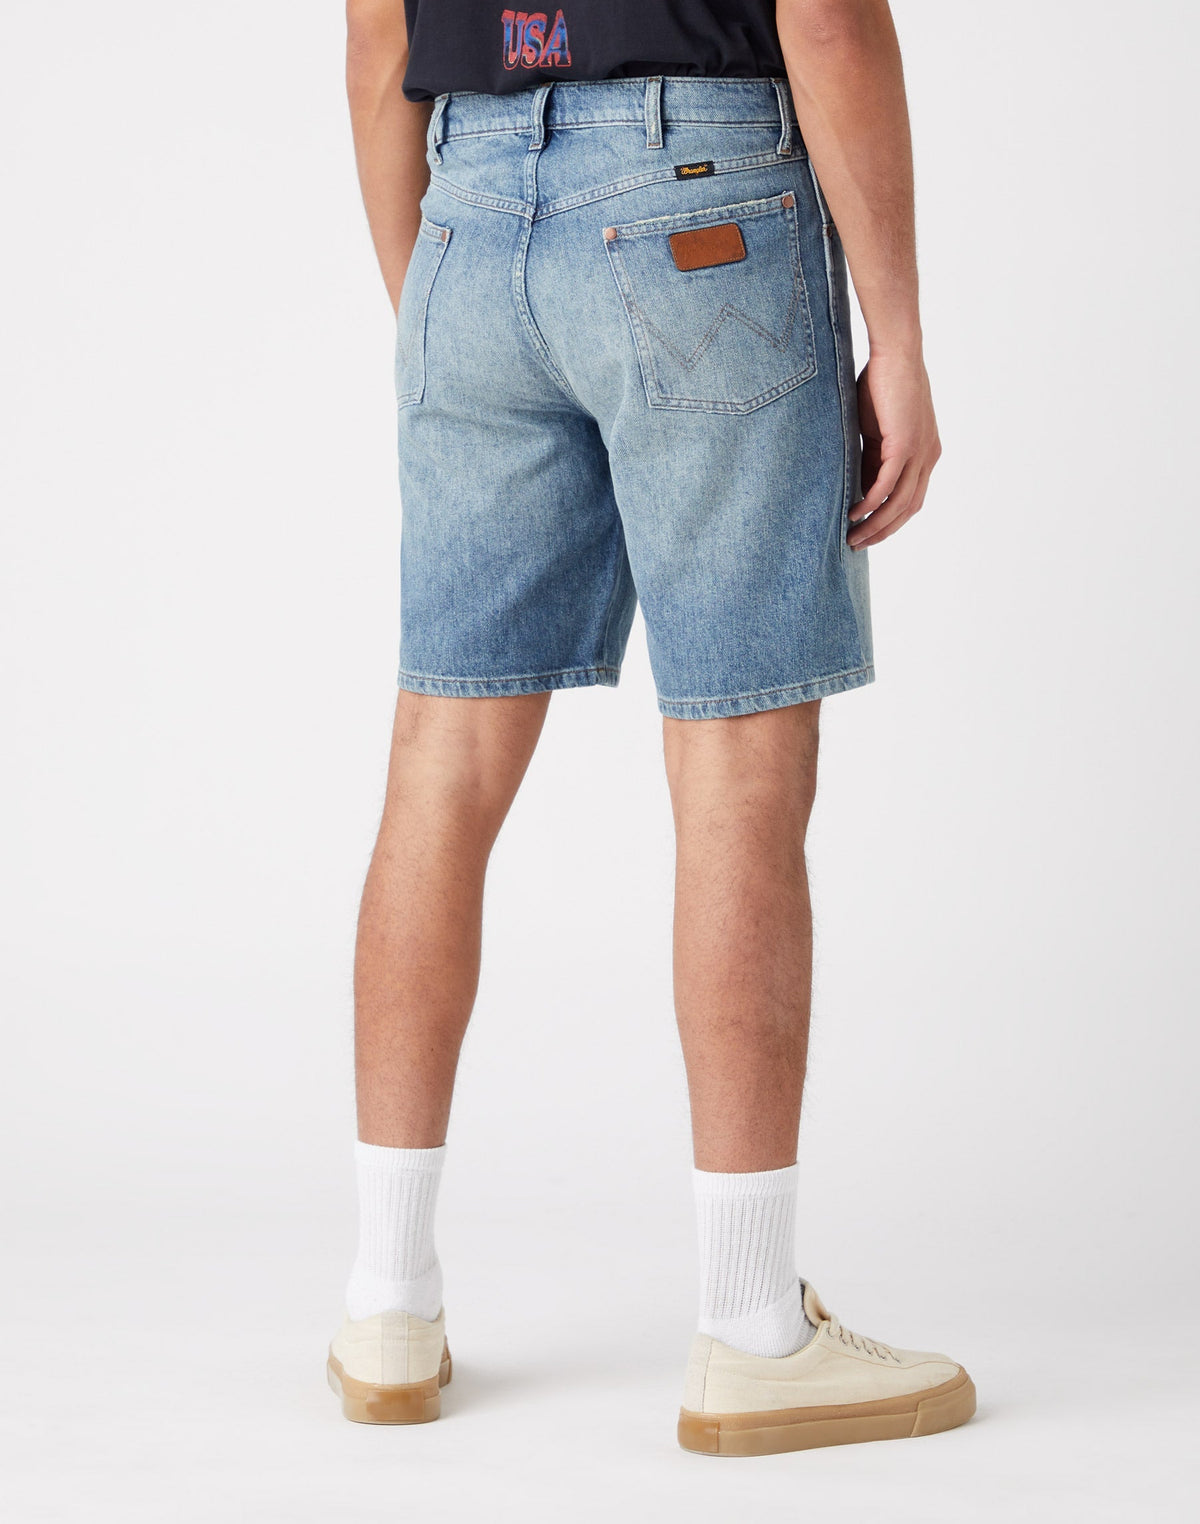 Redding Shorts in Clear Blue